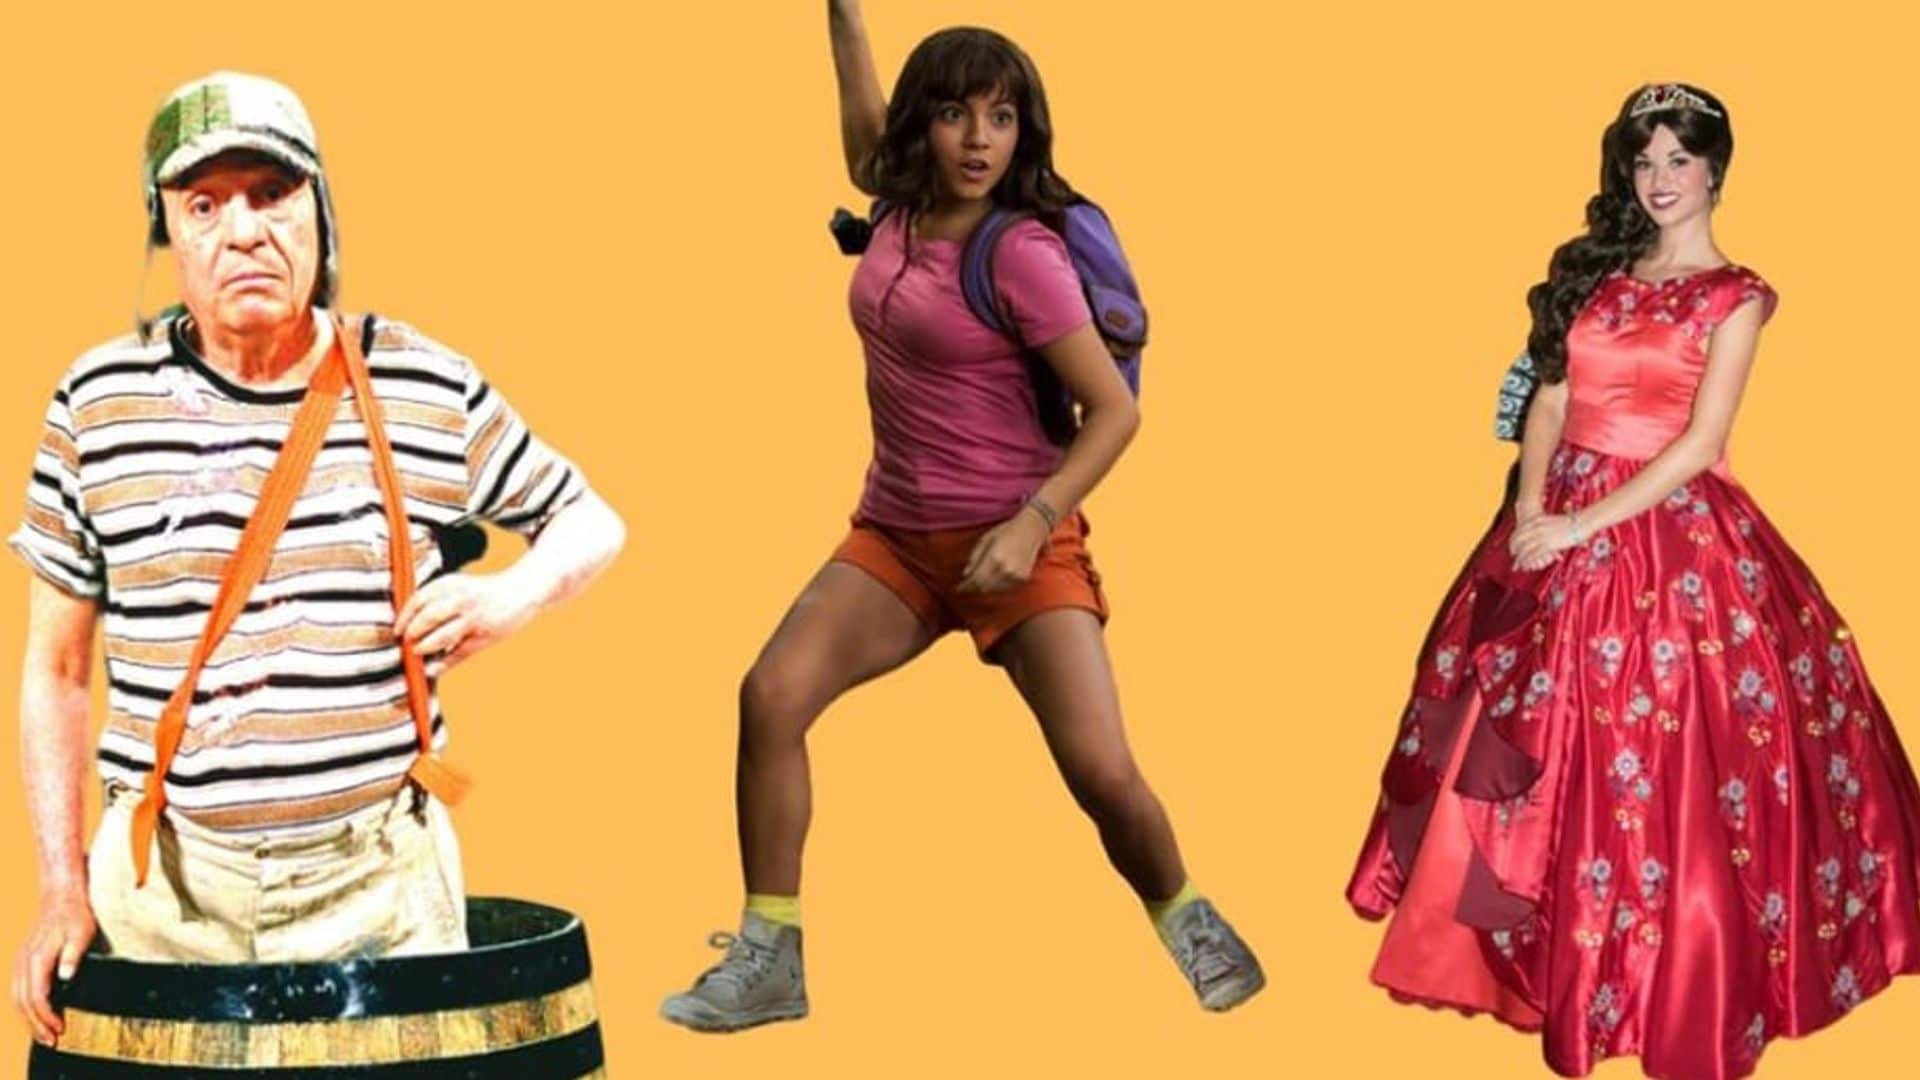 Get inspired by these Latinx pop culture icons for your Halloween costume